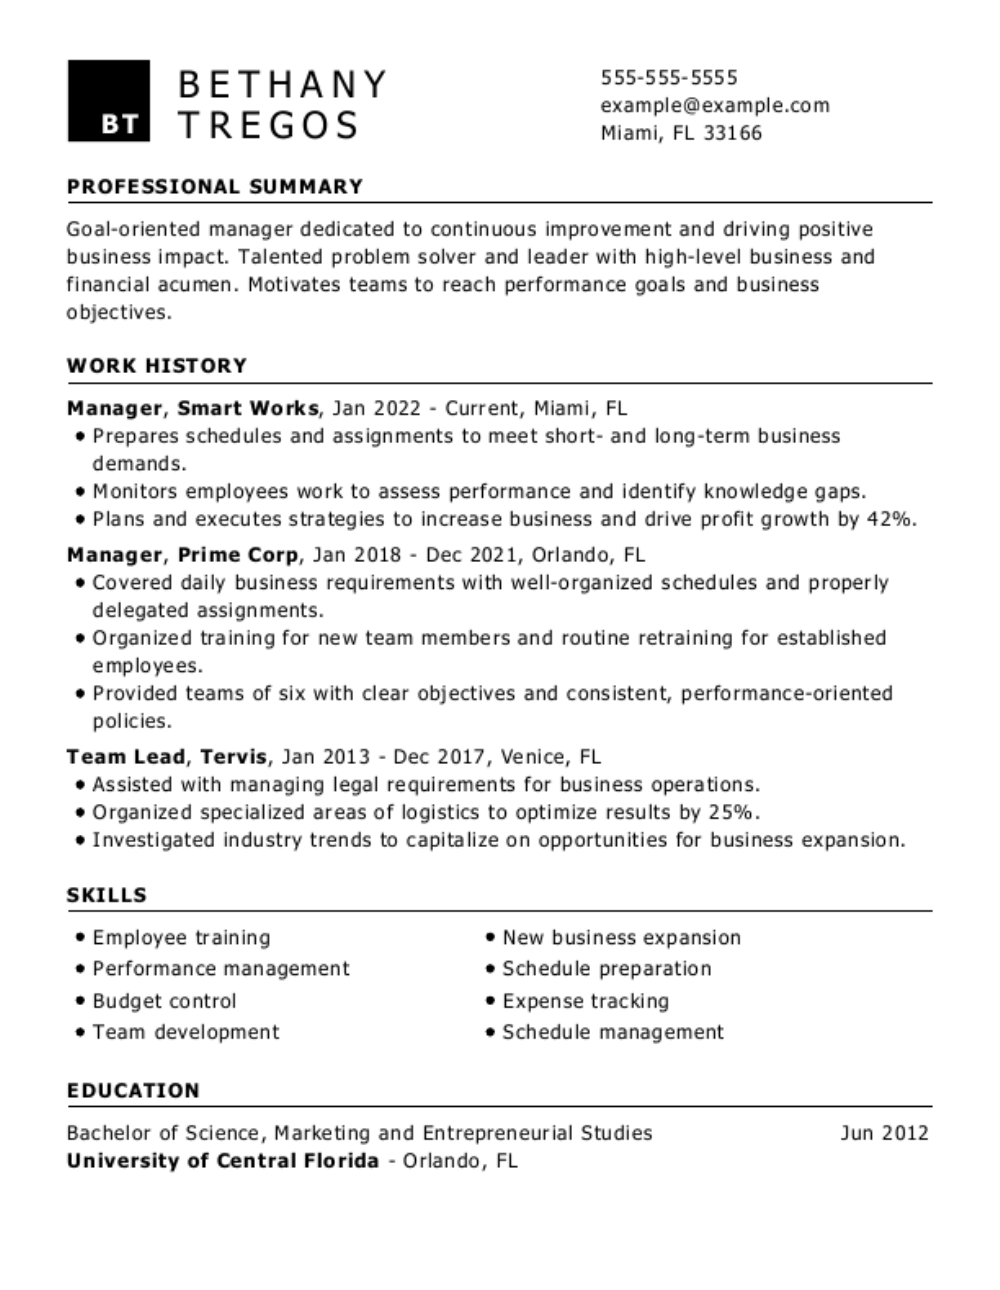 Manager resume example